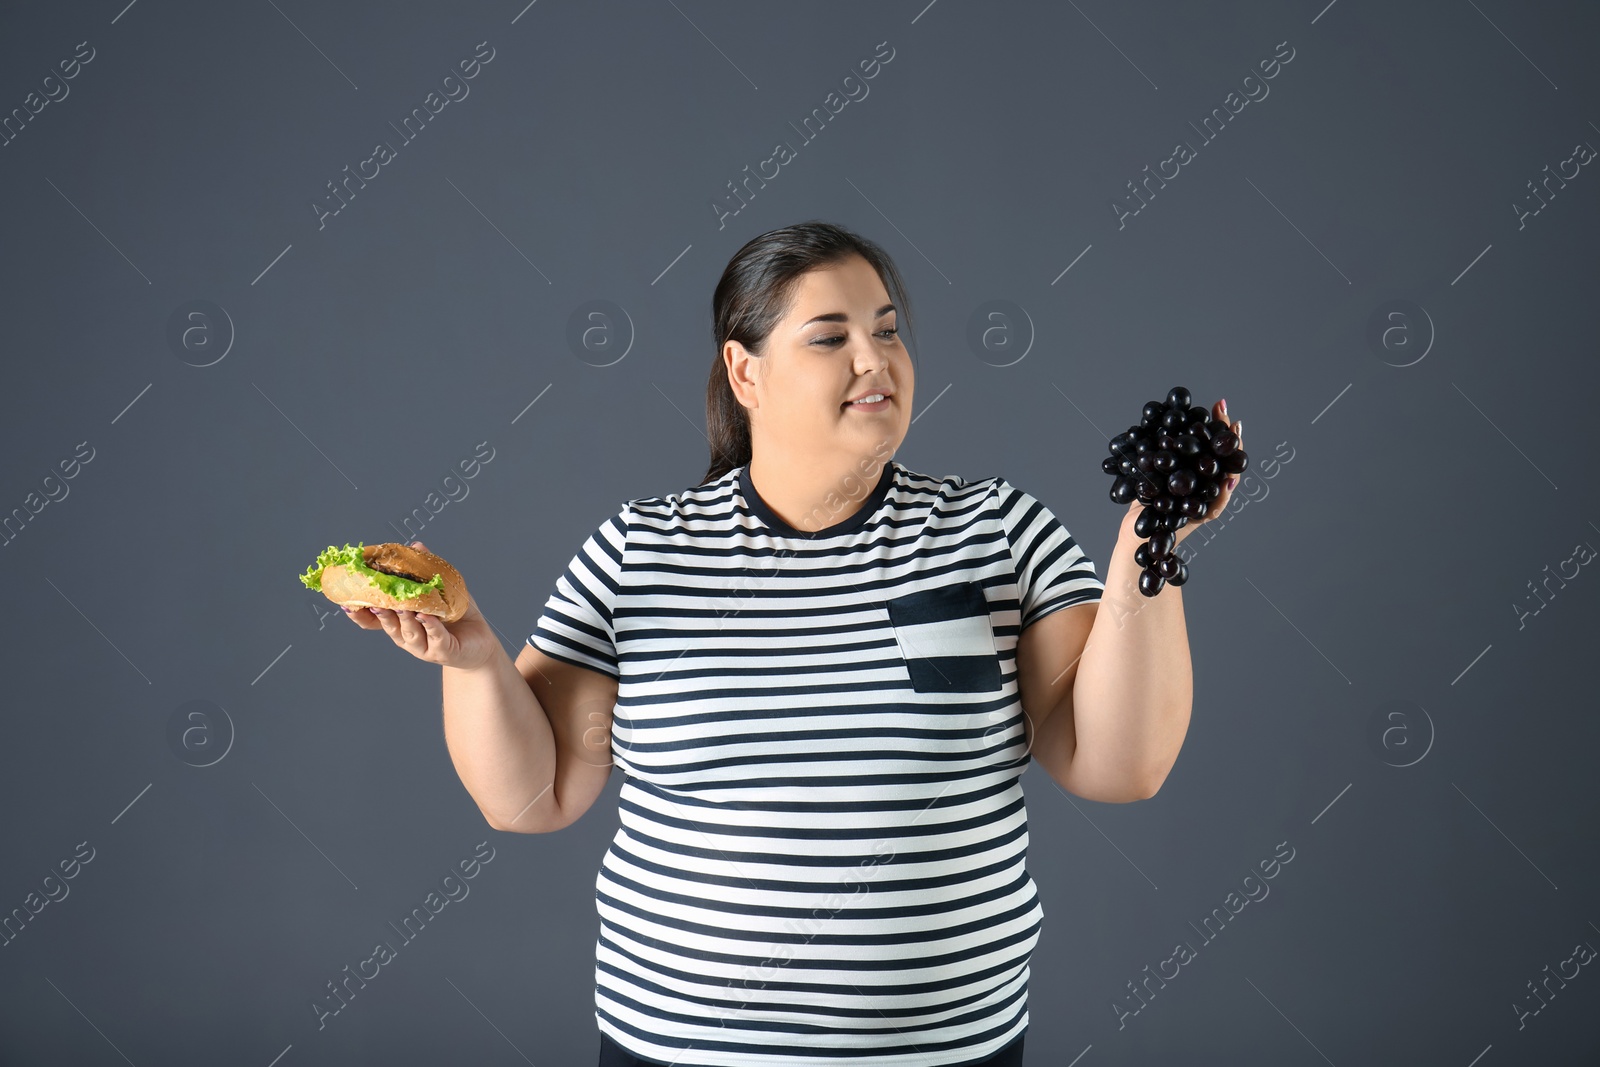 Photo of Overweight woman with grapes and hamburger on gray background